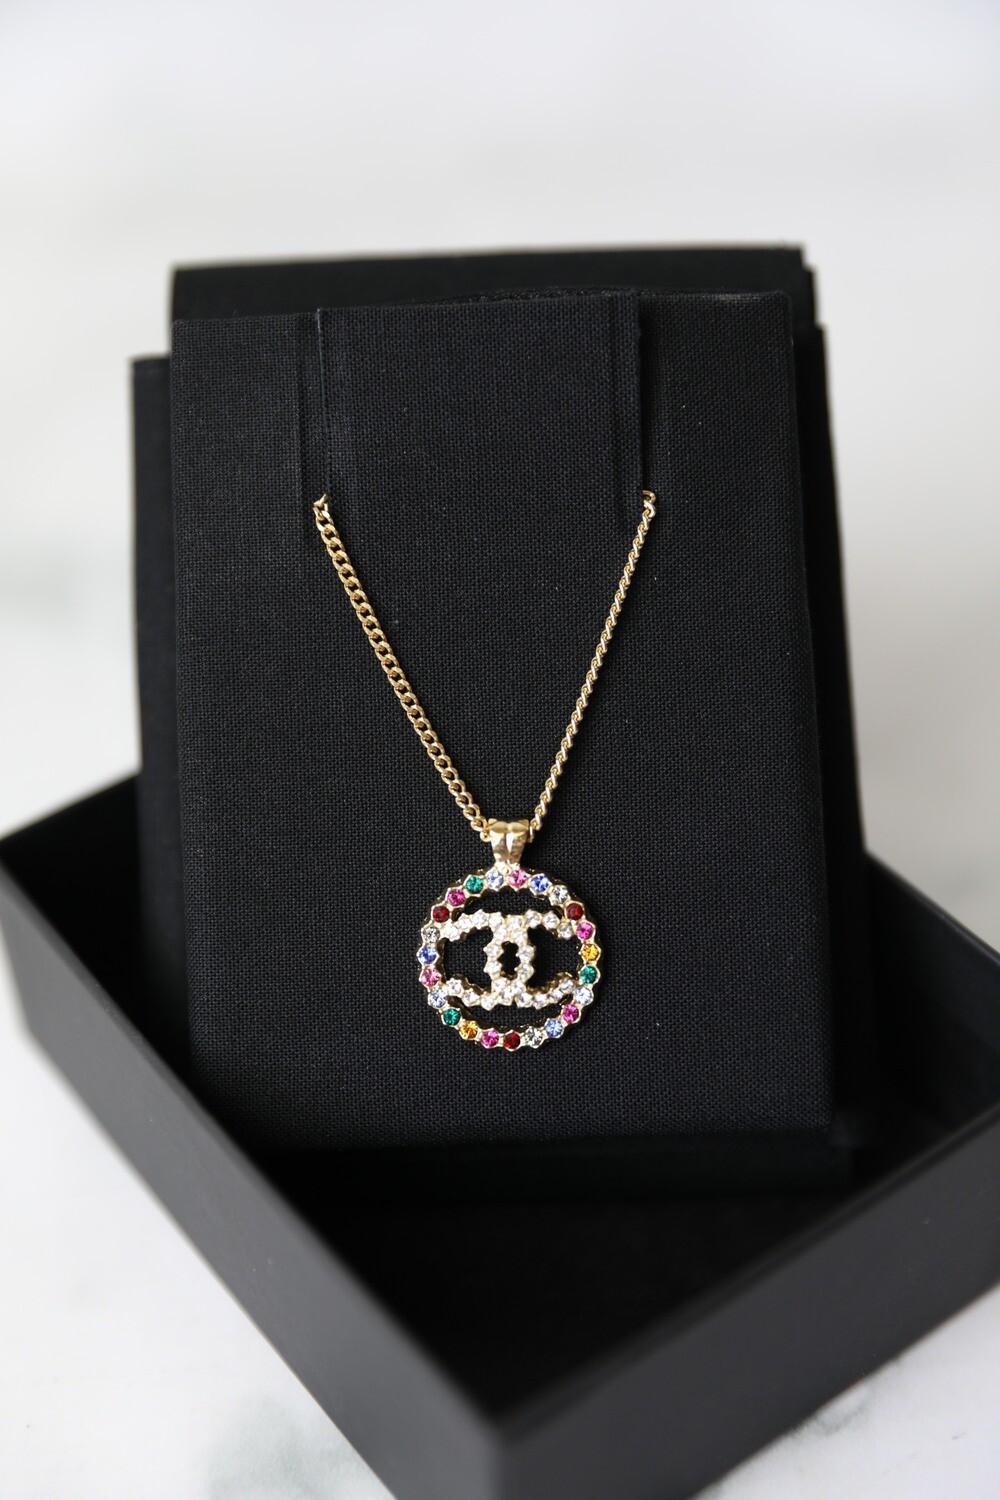 CHANEL Crystal Silver Fashion Necklaces & Pendants for sale